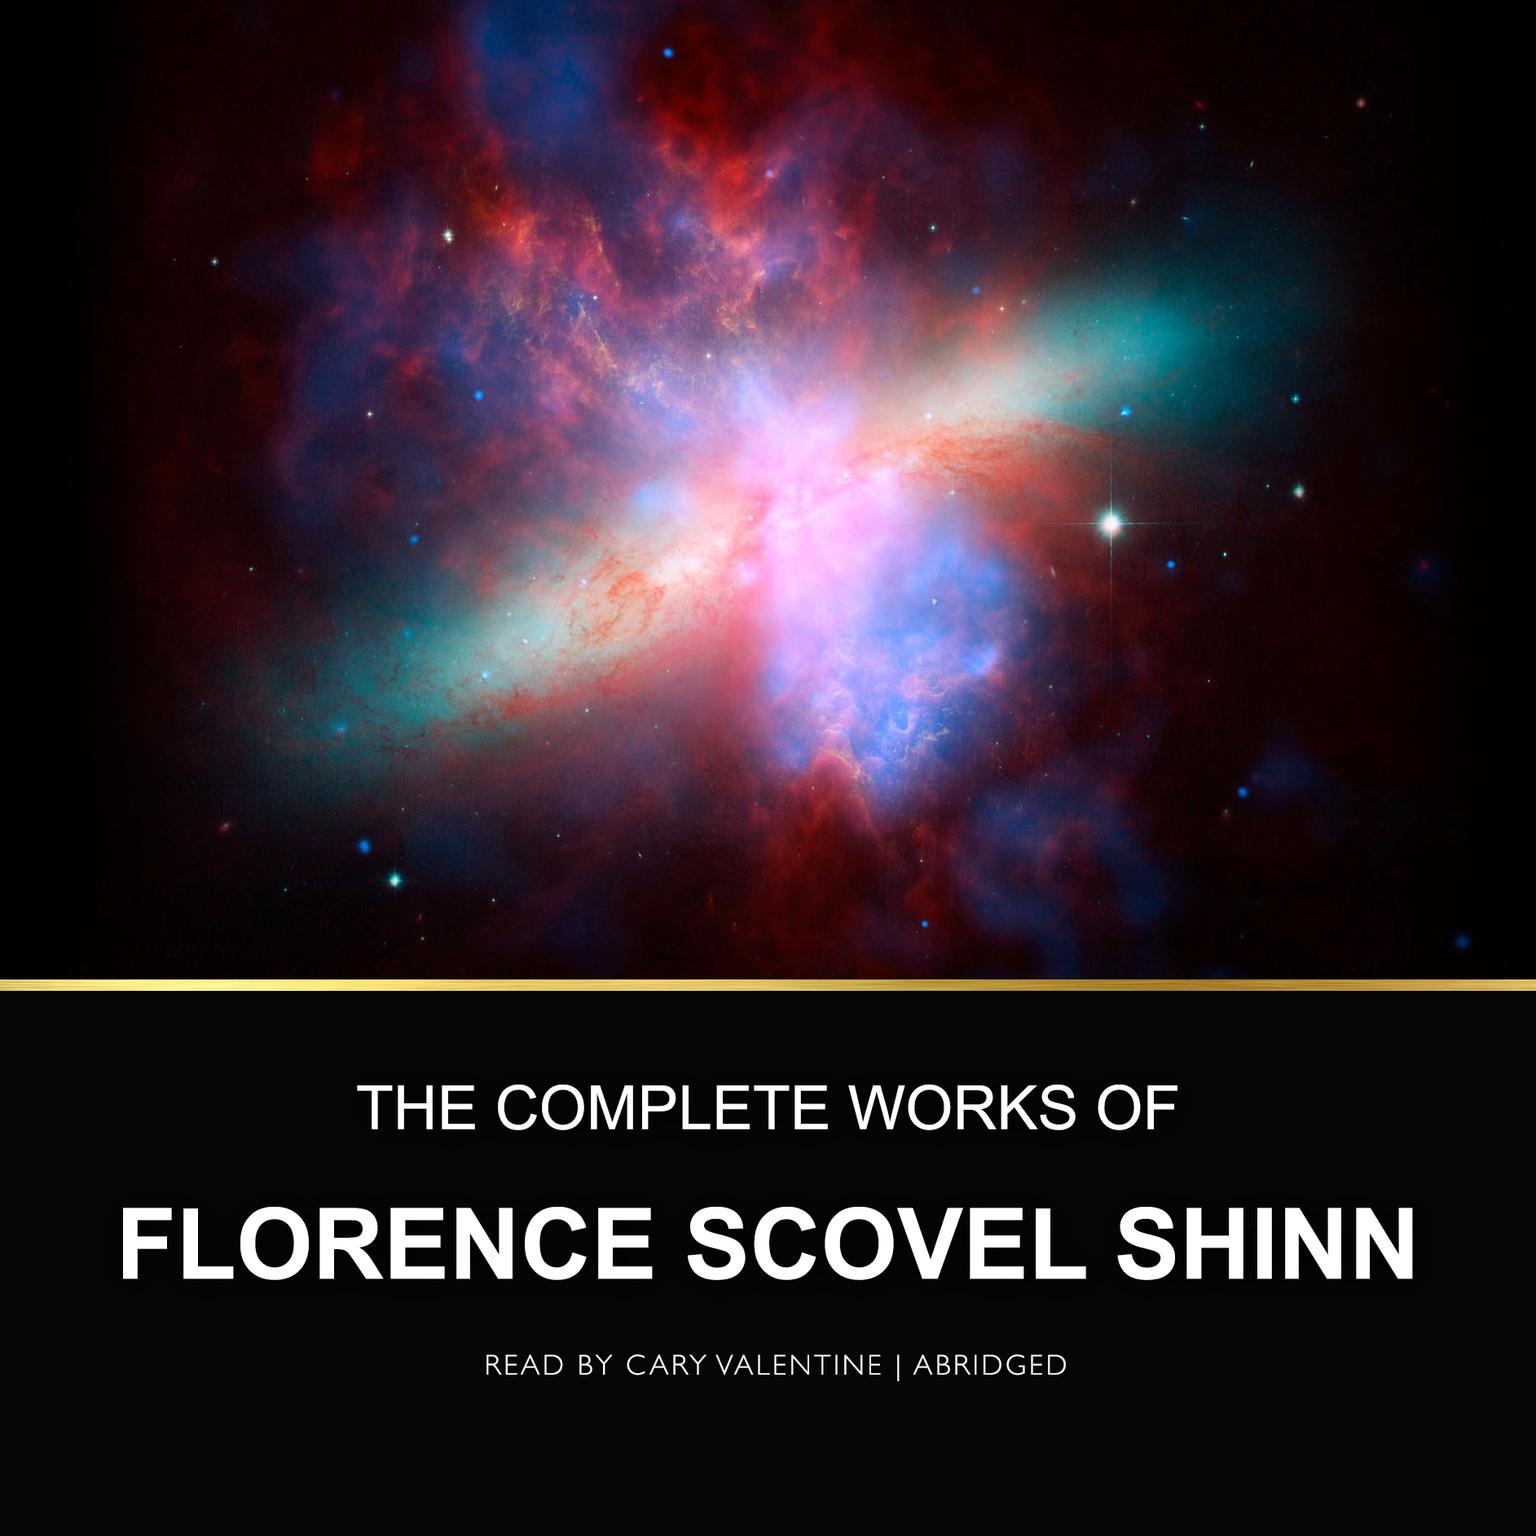 The Complete Works of Florence Scovel Shinn (Abridged) Audiobook, by Florence Scovel Shinn